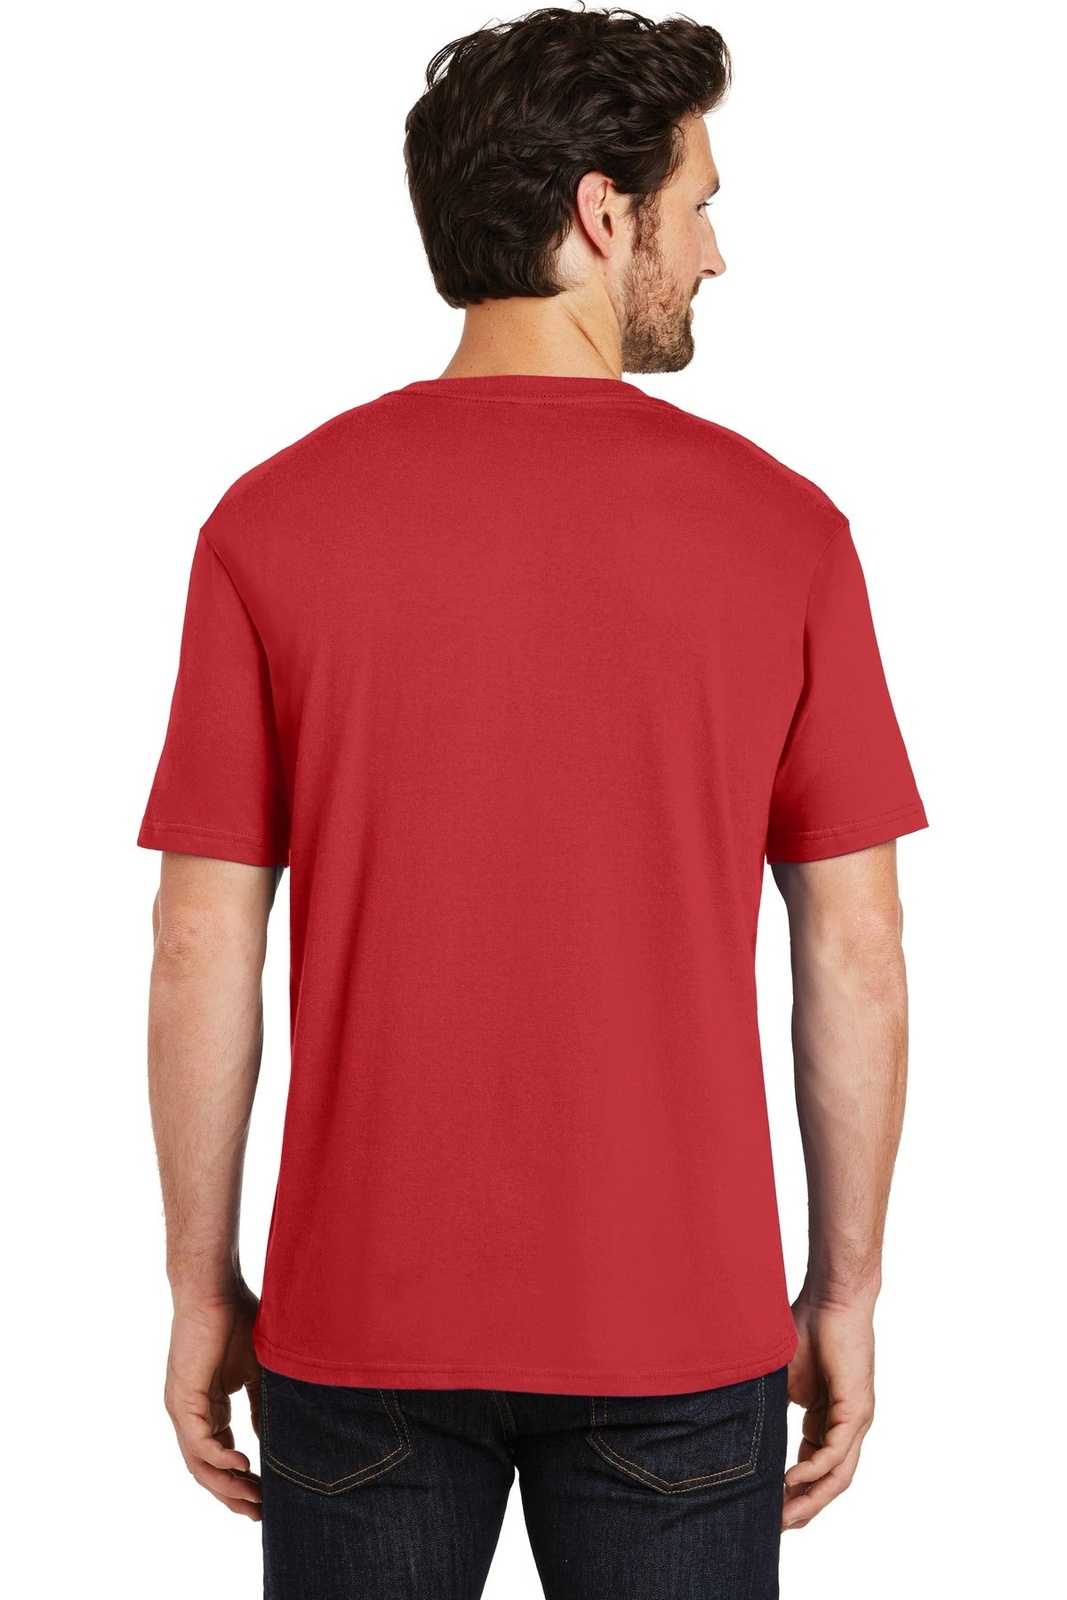 District DT104 Perfect Weight Tee - Classic Red - HIT a Double - 2